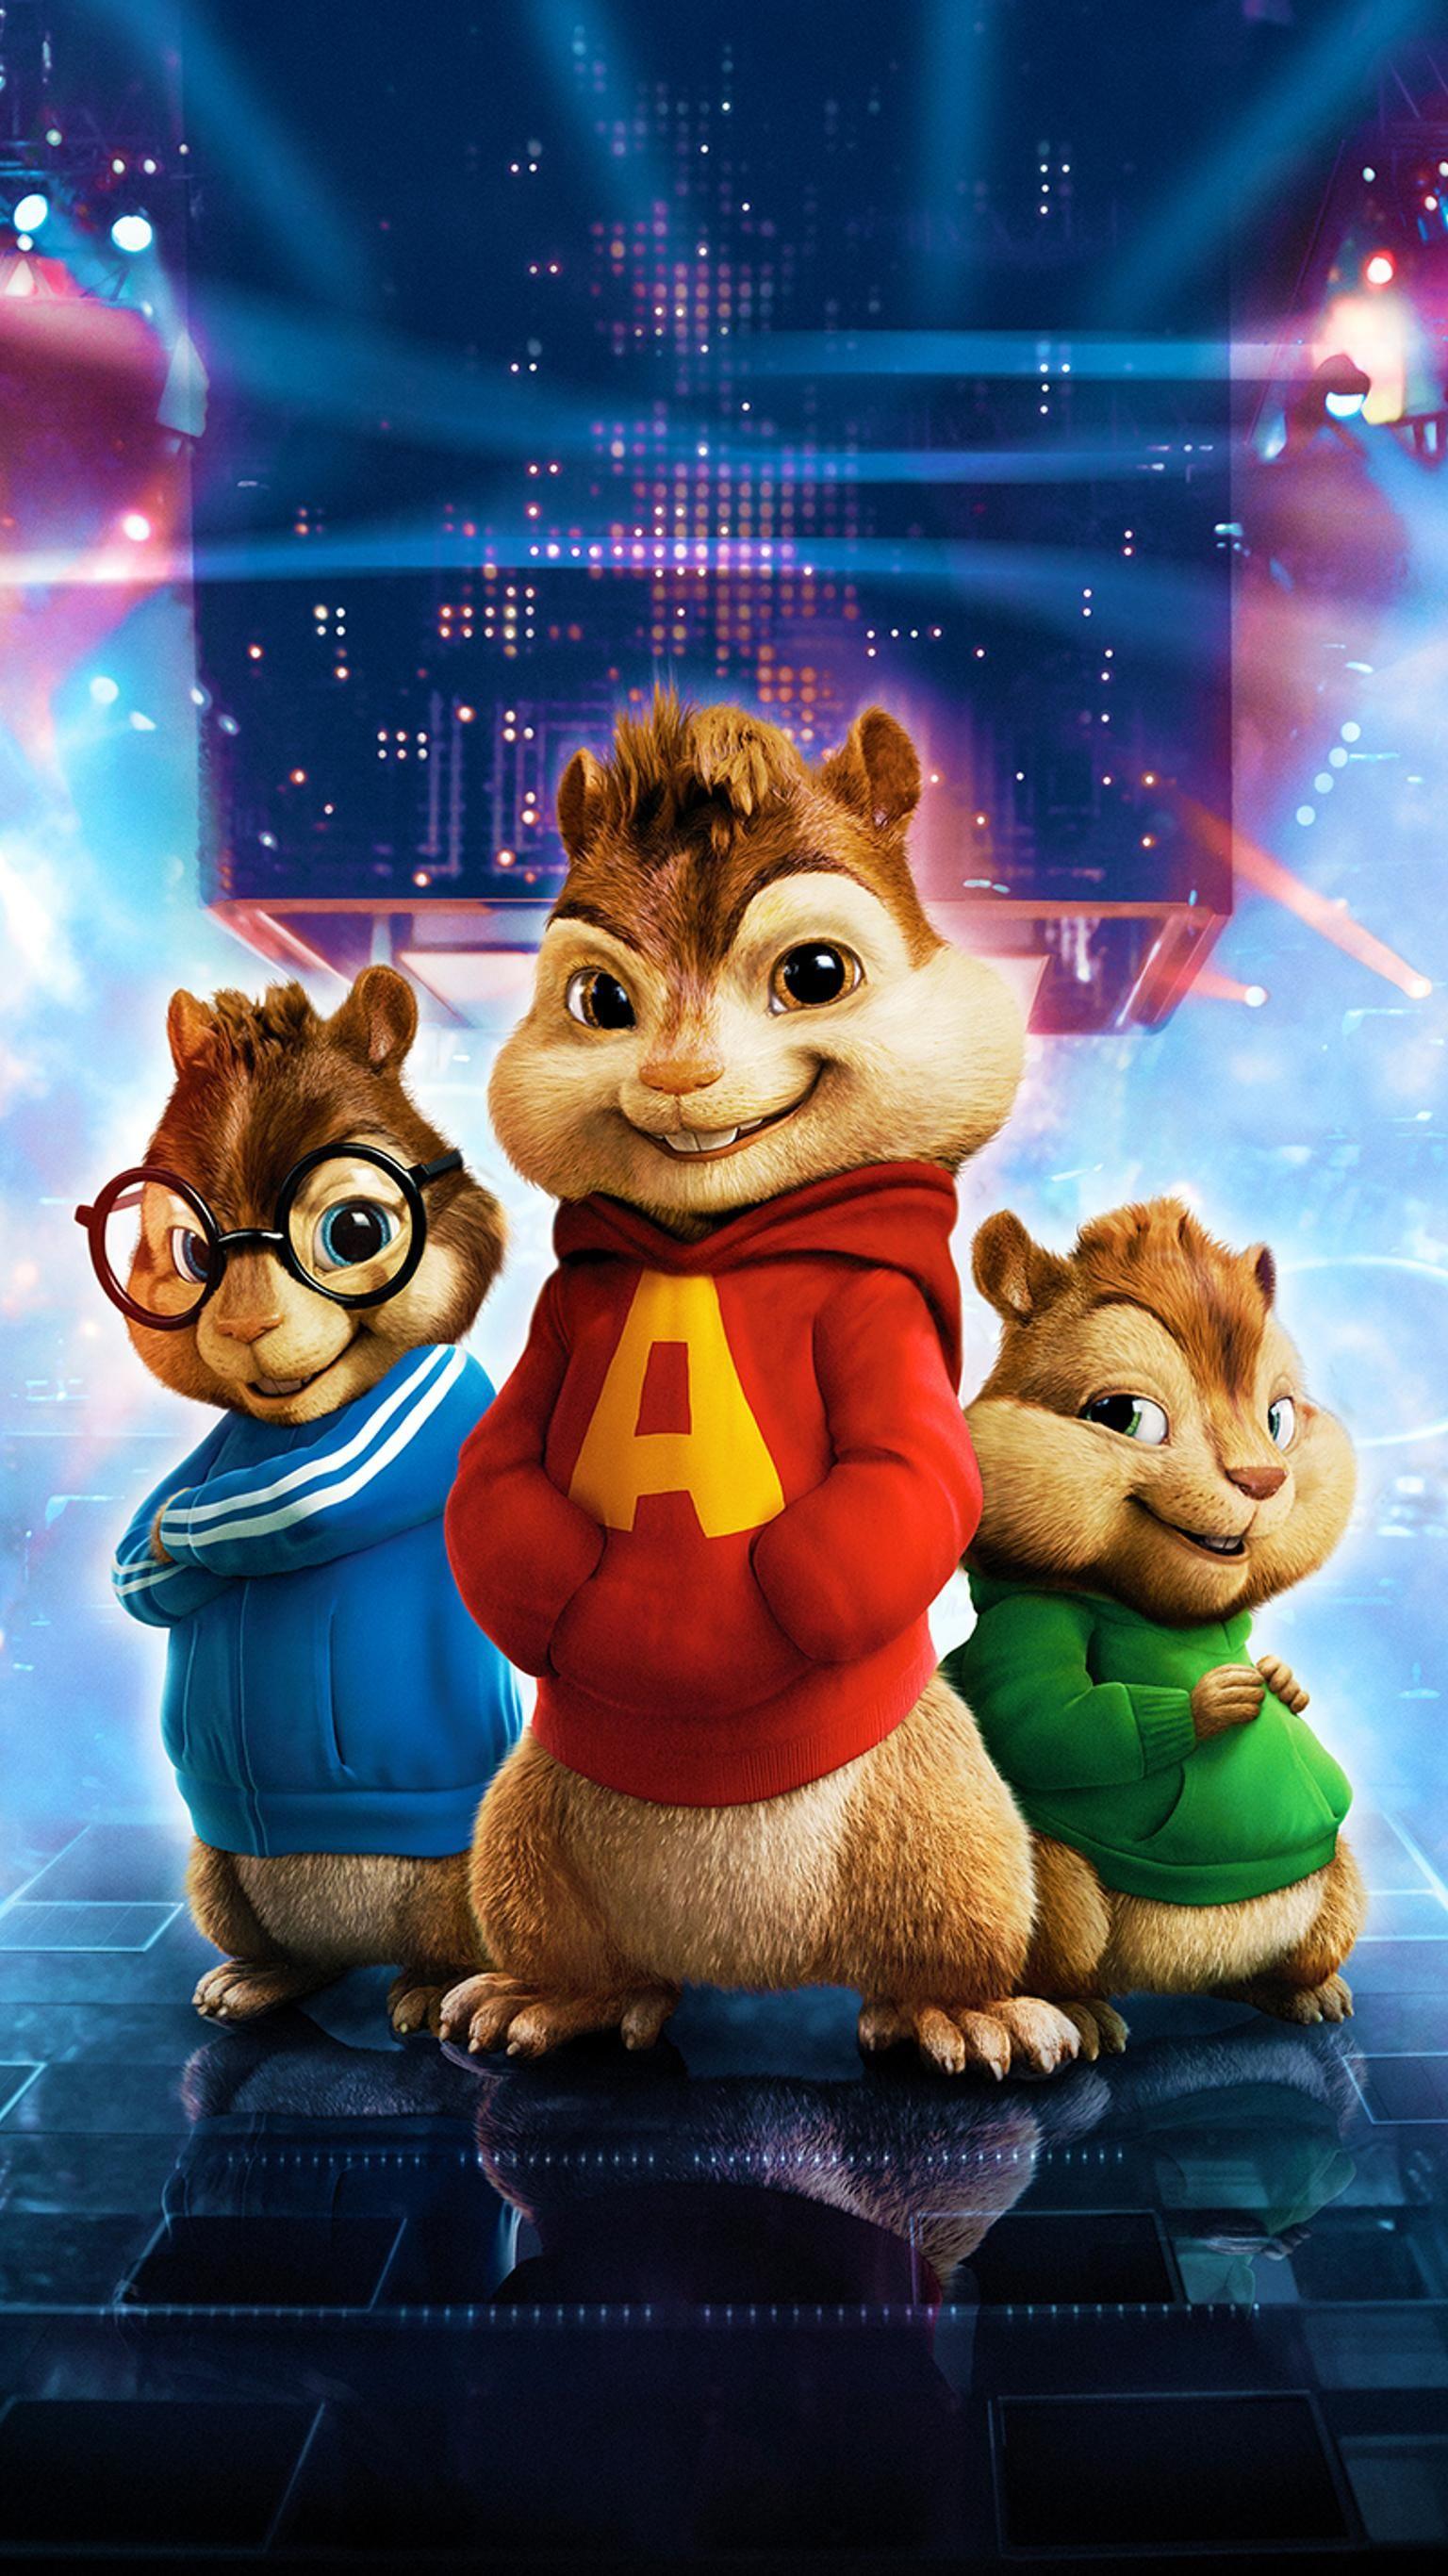 Alvin and the Chipmunks (2007) Phone Wallpaper in 2019